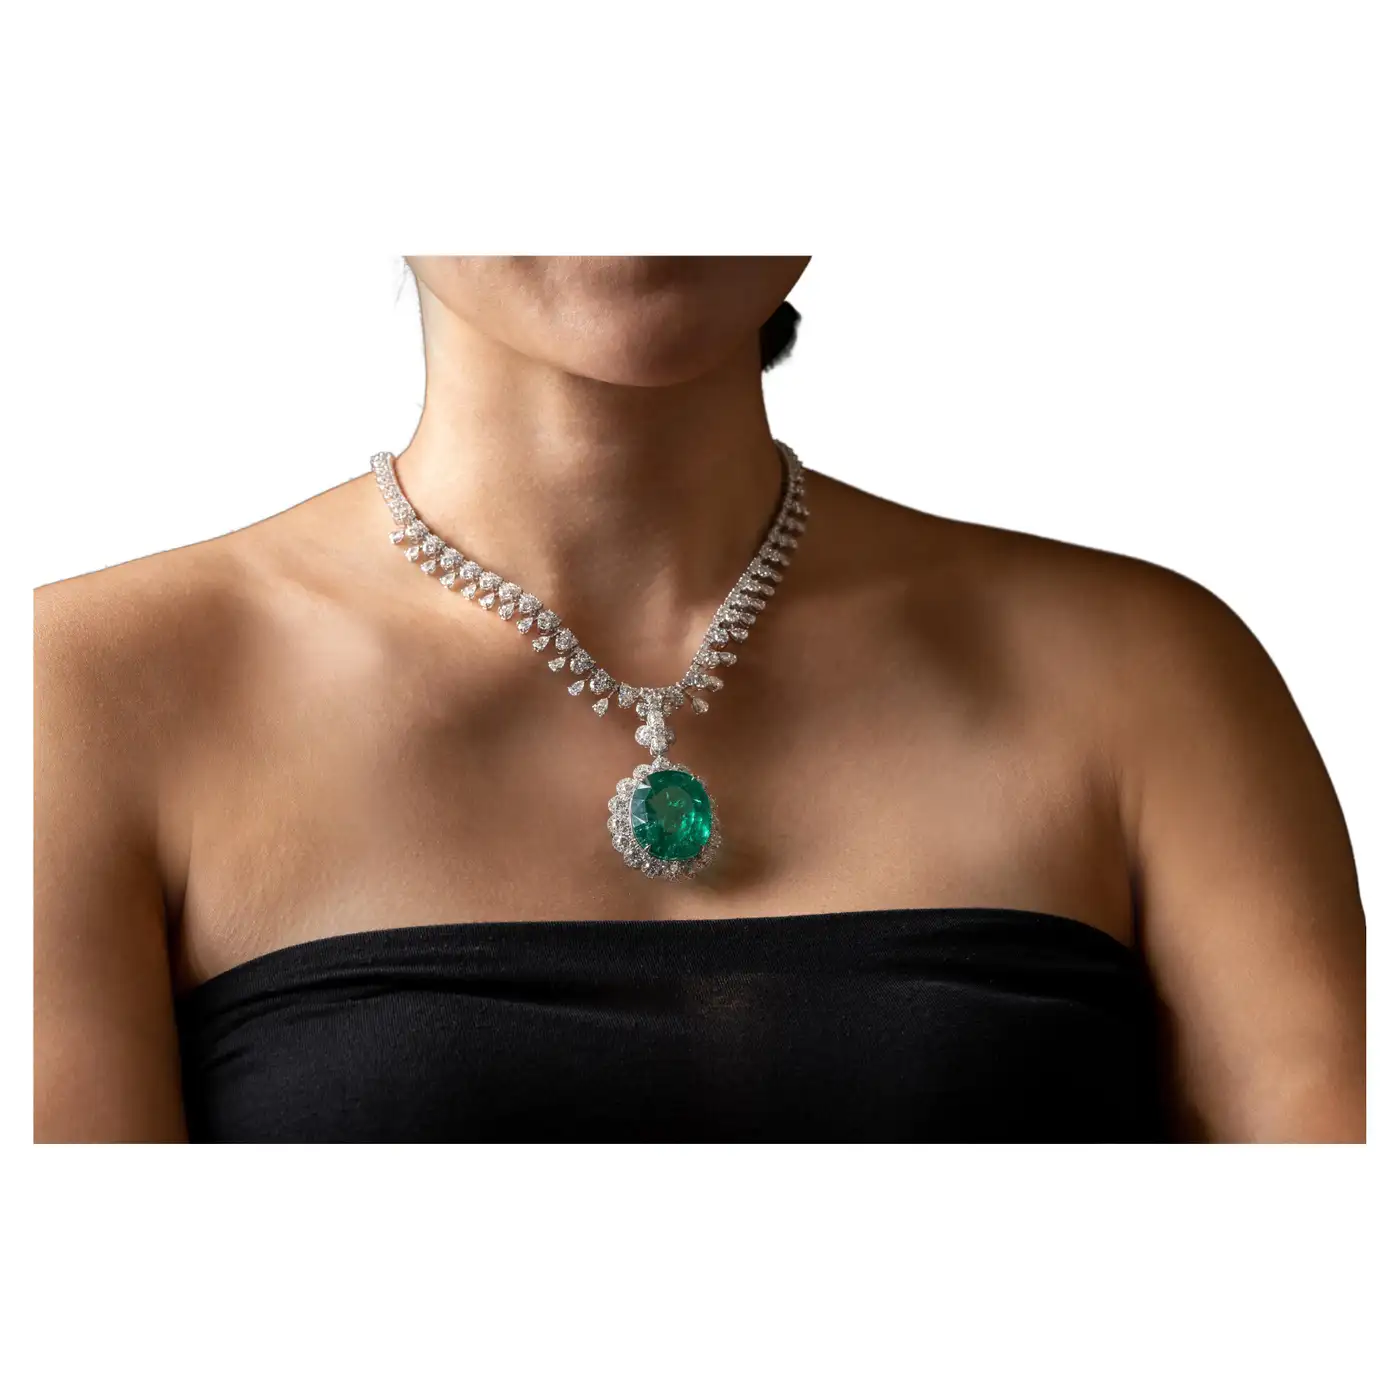 No-Oil-Colombian-69-Ct-Emerald-Platinum-Award-Oval-Luxury-Necklace-1.webp